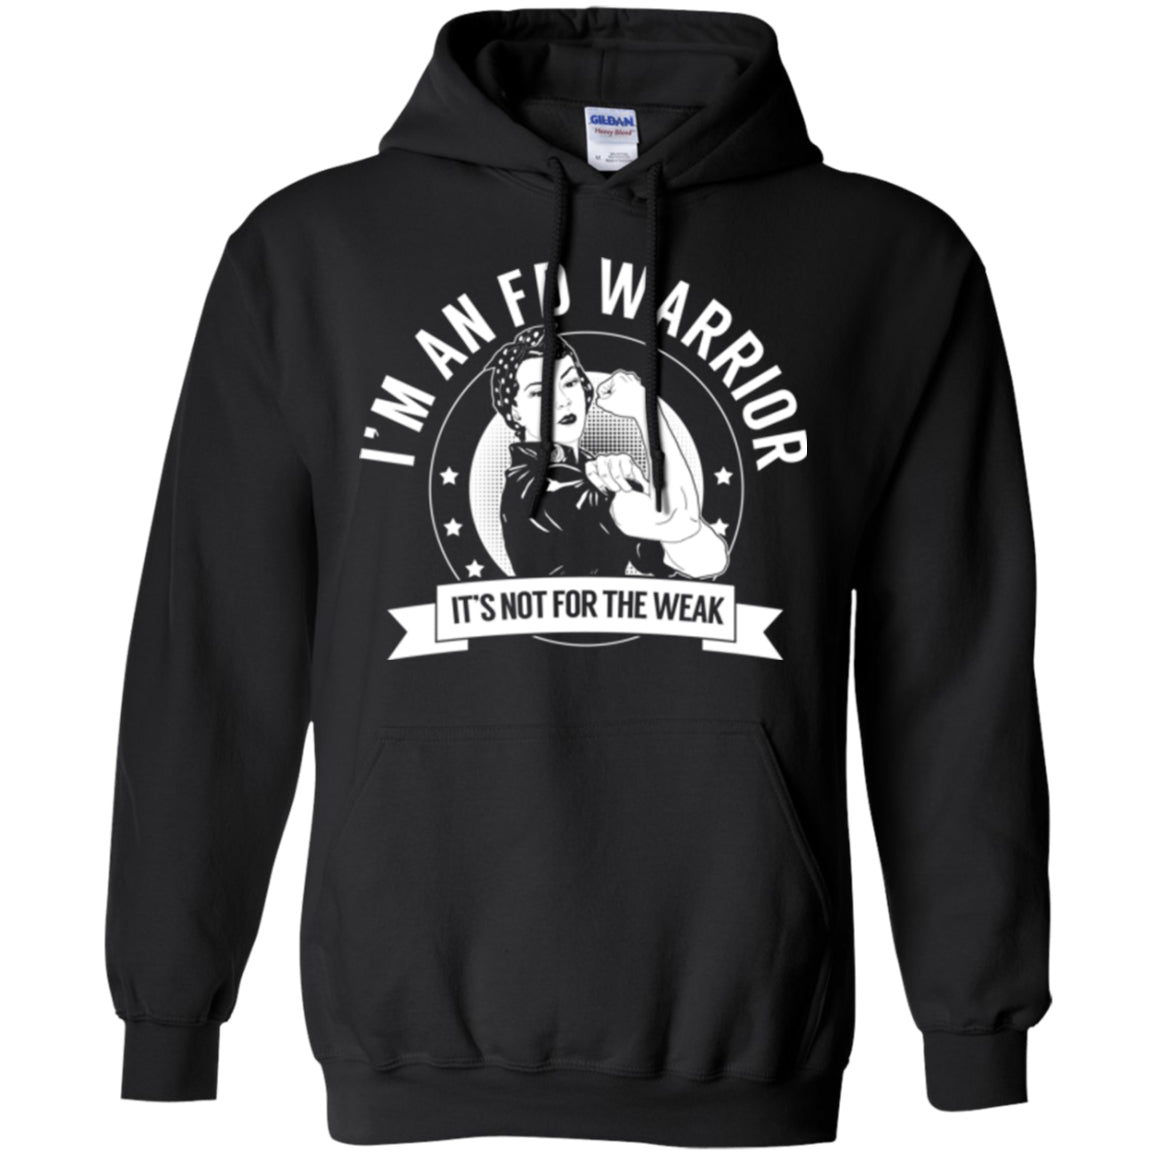 Fibrous Dysplasia - FD Warrior Not For The Weak Pullover Hoodie 8 oz. - The Unchargeables